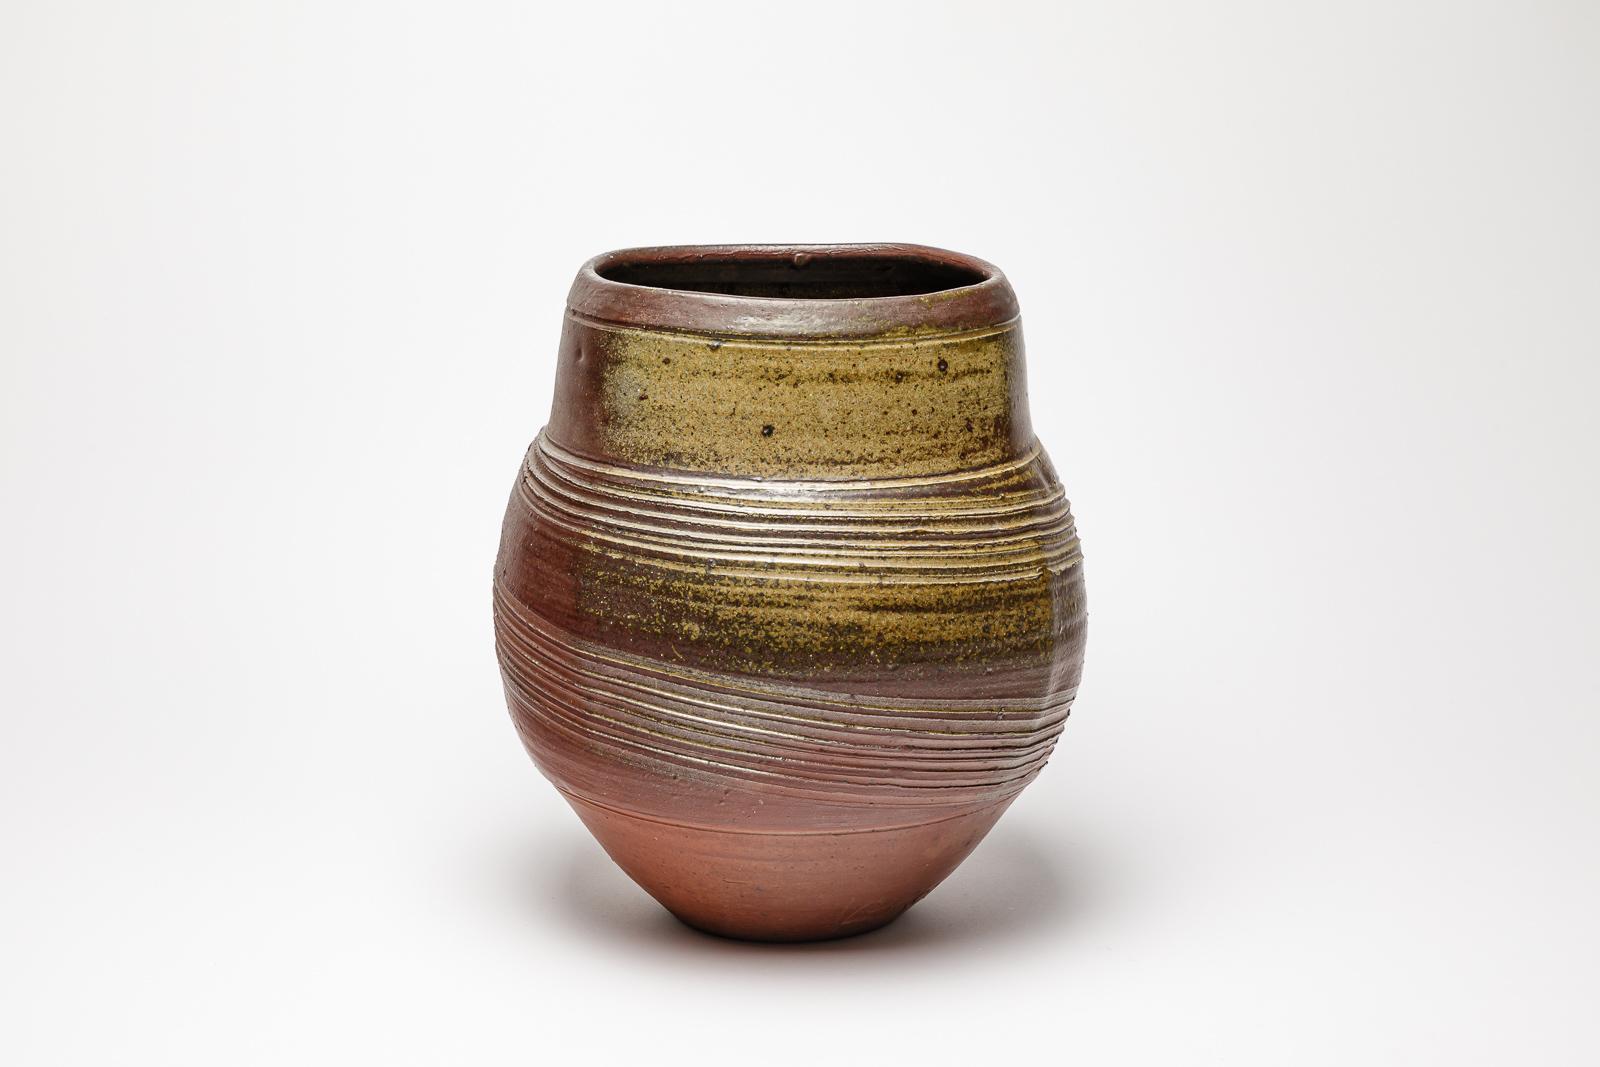 Woodfired ceramic vase by Eric Astoul.
Artist signature under the base. 1987.
H : 12.6’ x 9.8’ inches.